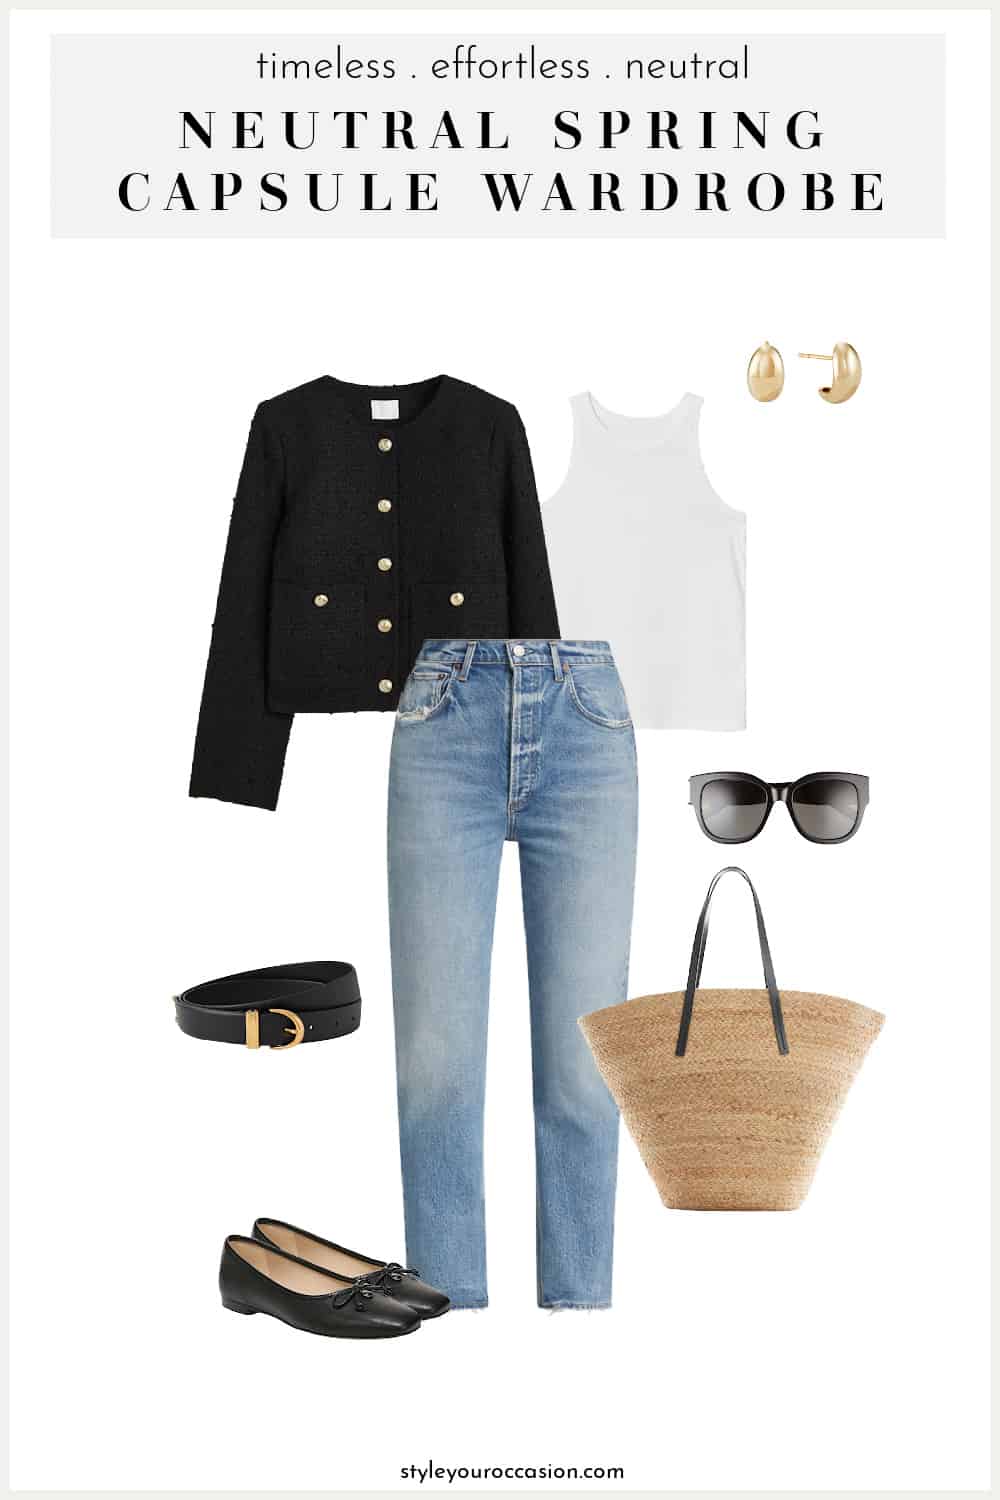 outfit image of a cropped black tweed jacket, white tank, blue jeans, and black ballet flats 